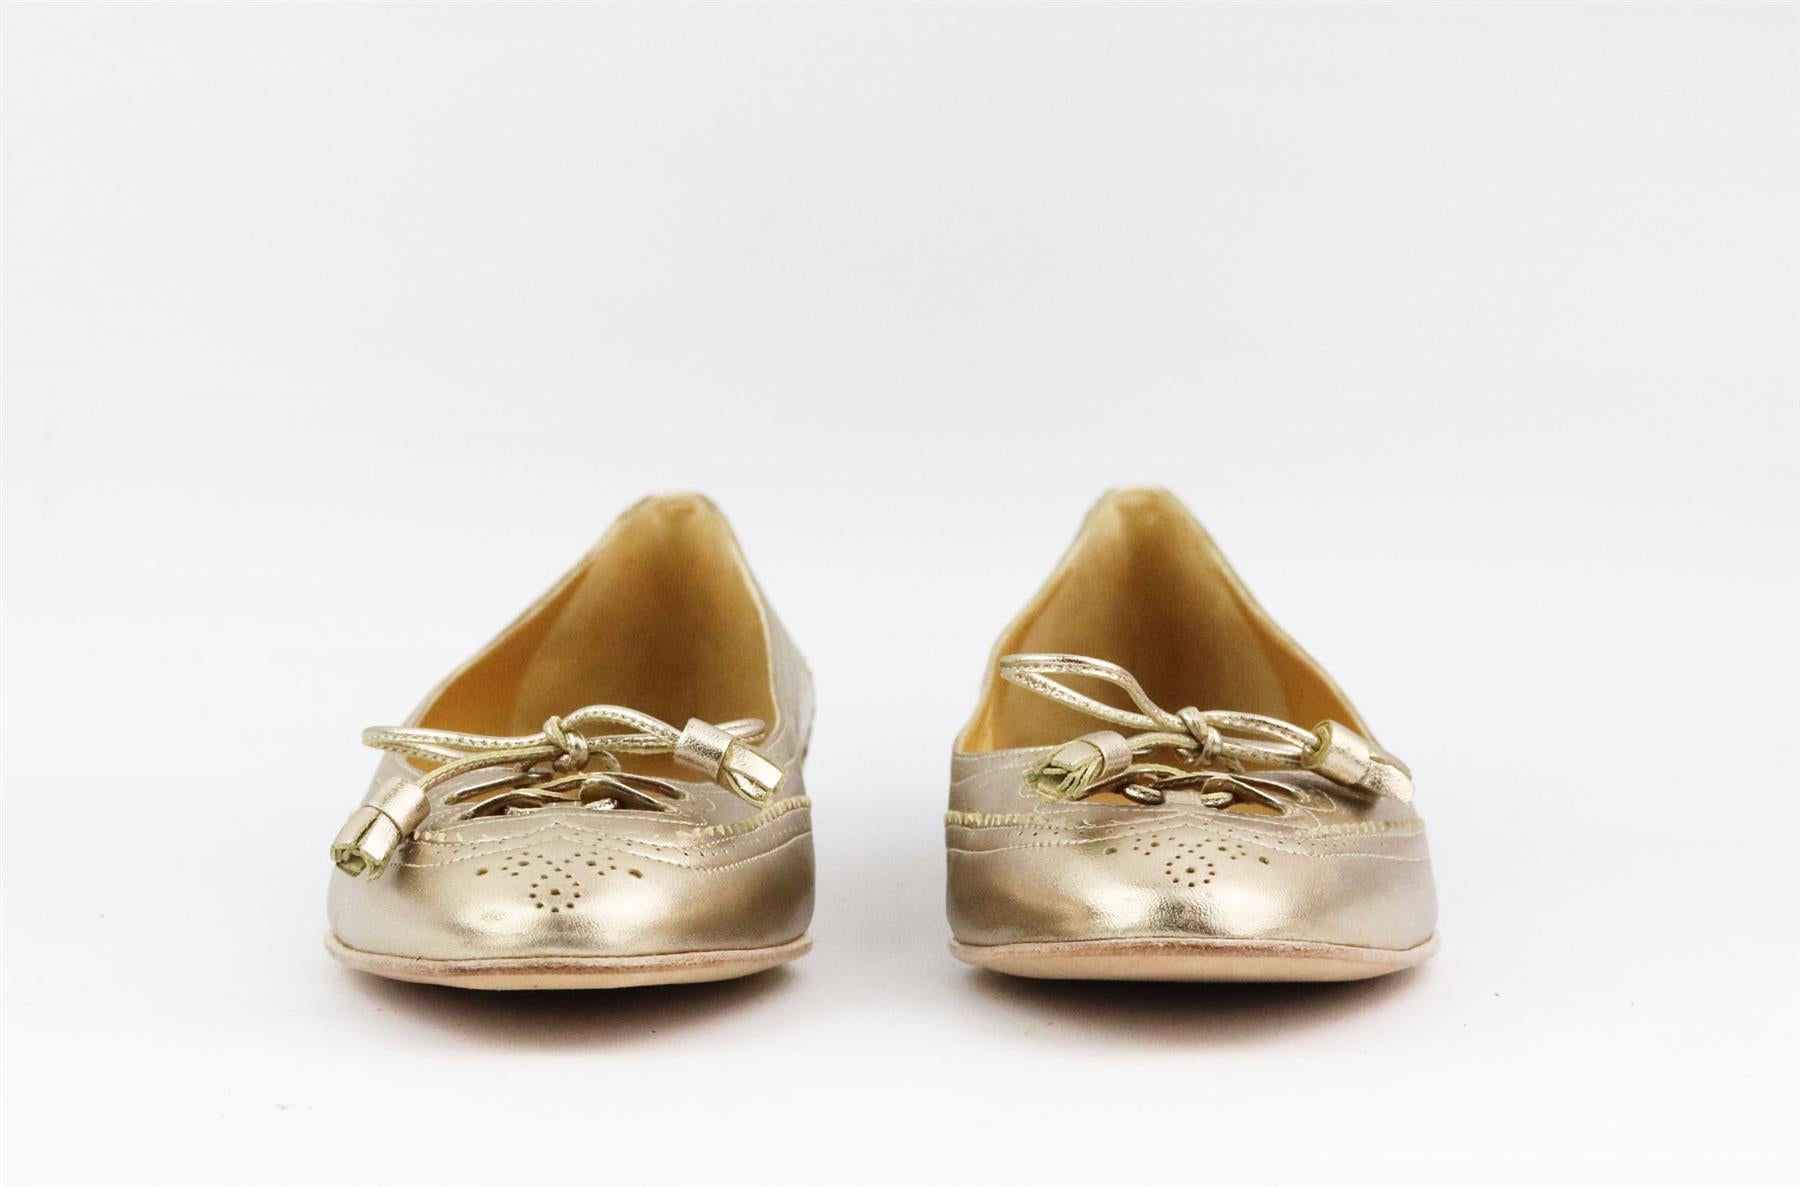 These ballerina flats by Hermès are traced with loafer-inspired leather and tassels along the almond toe, expertly crafted in Italy from leather and detailed with bow detail on the top. Heel measures approximately 7.6 mm/ 0.3 inches. Metallic-gold